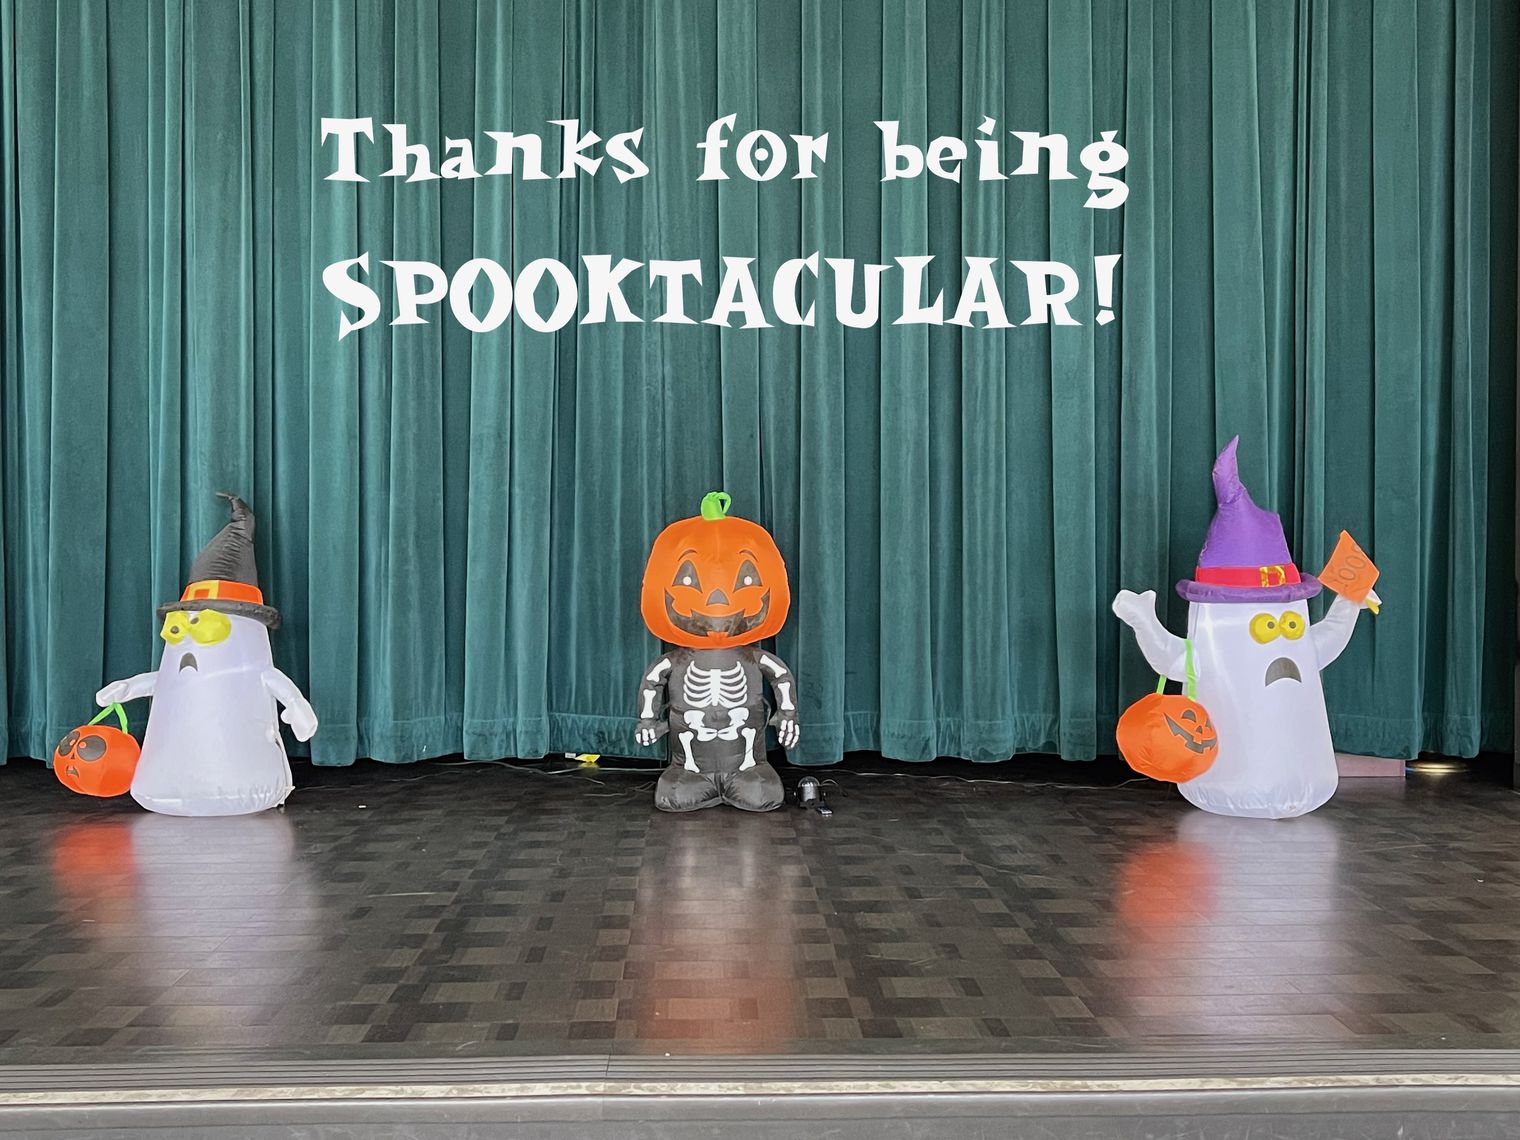 Ghost, Jacalanter on school stage with a note. "Thanks for being Spooktacular!"